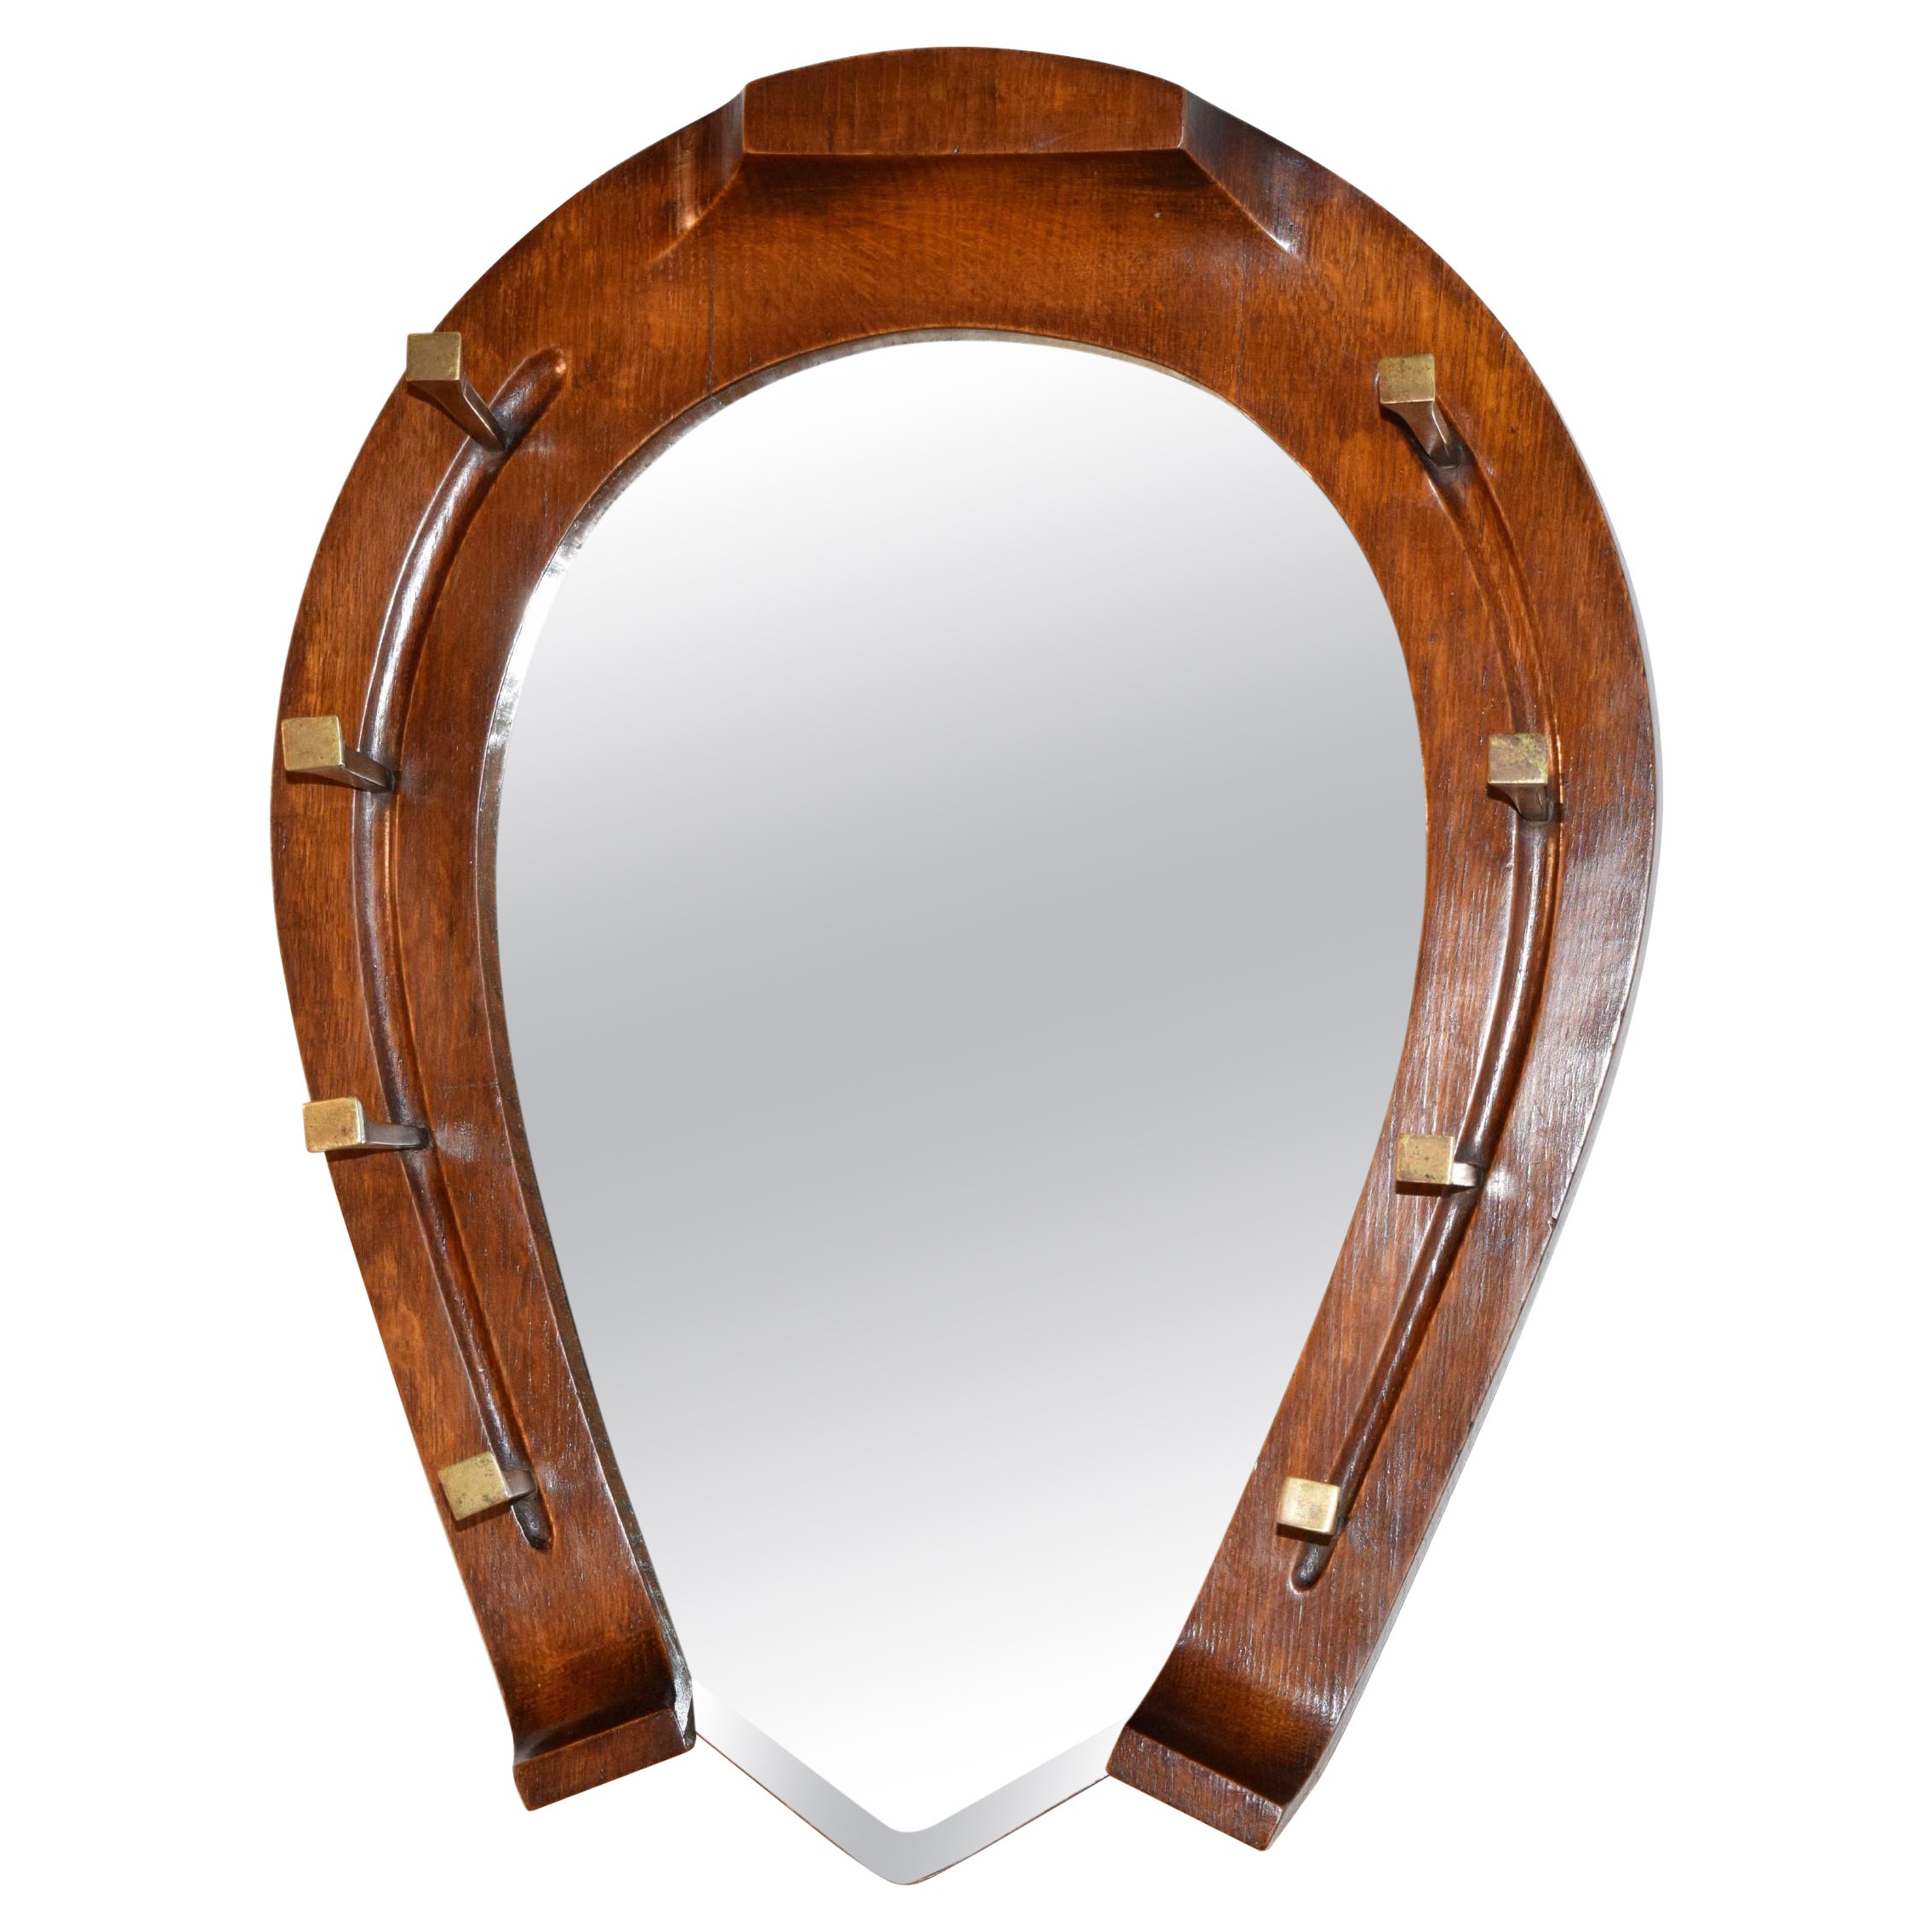 English Horseshoe Mirror, Dated May 11, 1878 For Sale